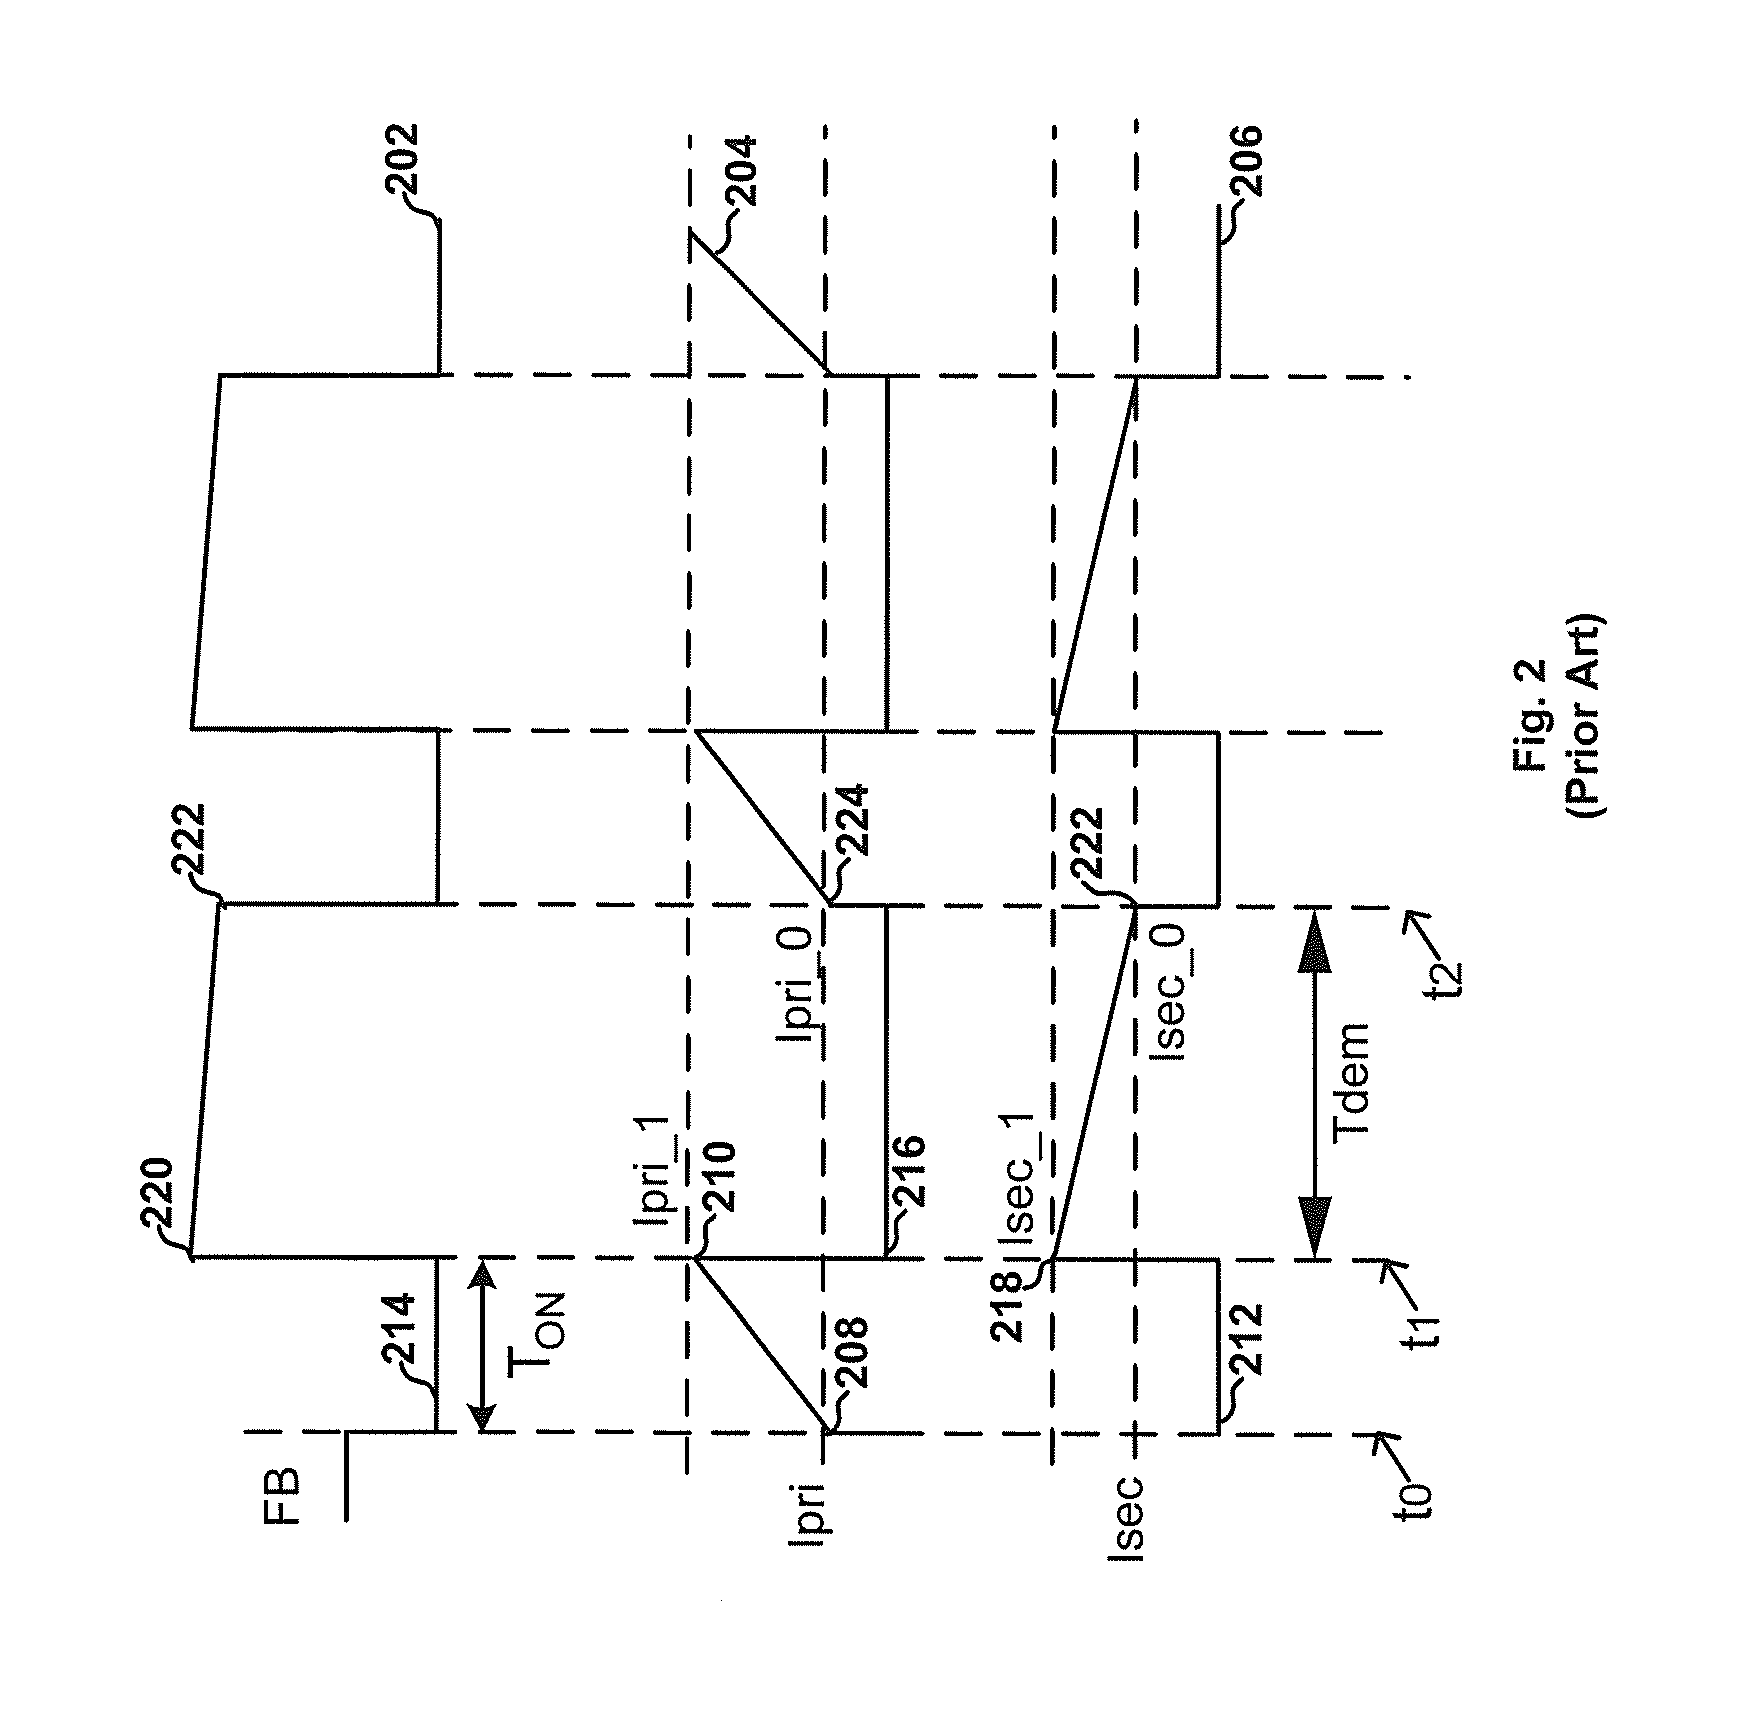 Systems and methods for current control of power conversion systems